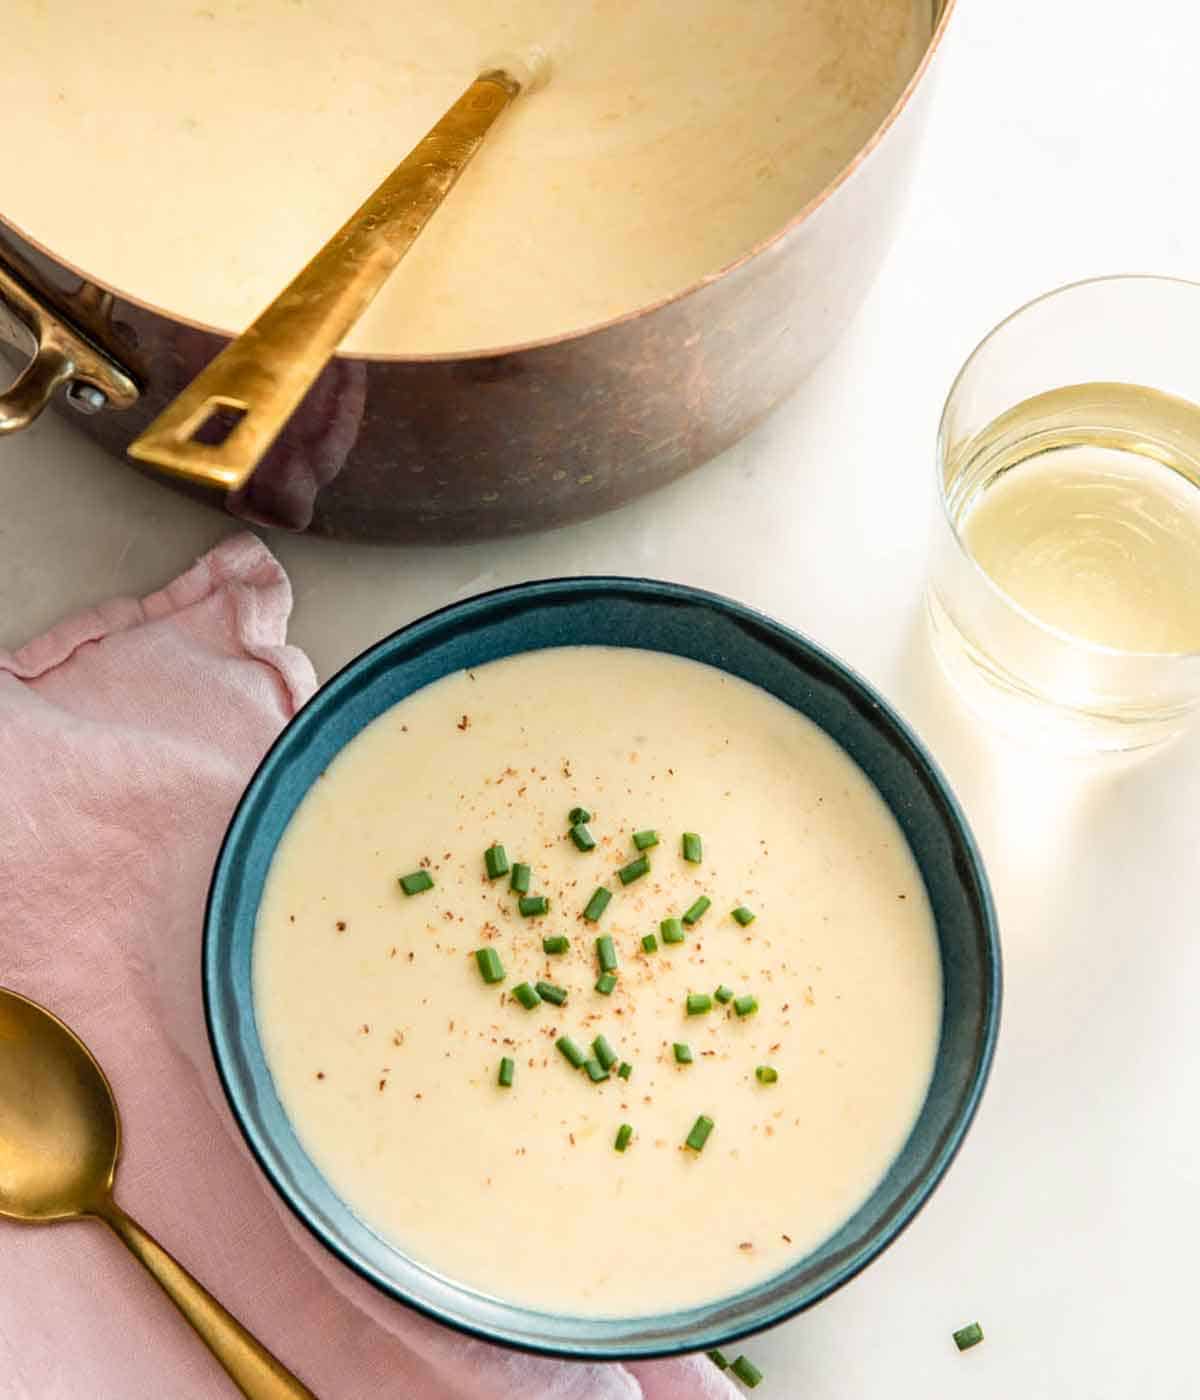 Overhead view of a bowl of vichyssoise with chives on top by a pot of more soup with a ladle.